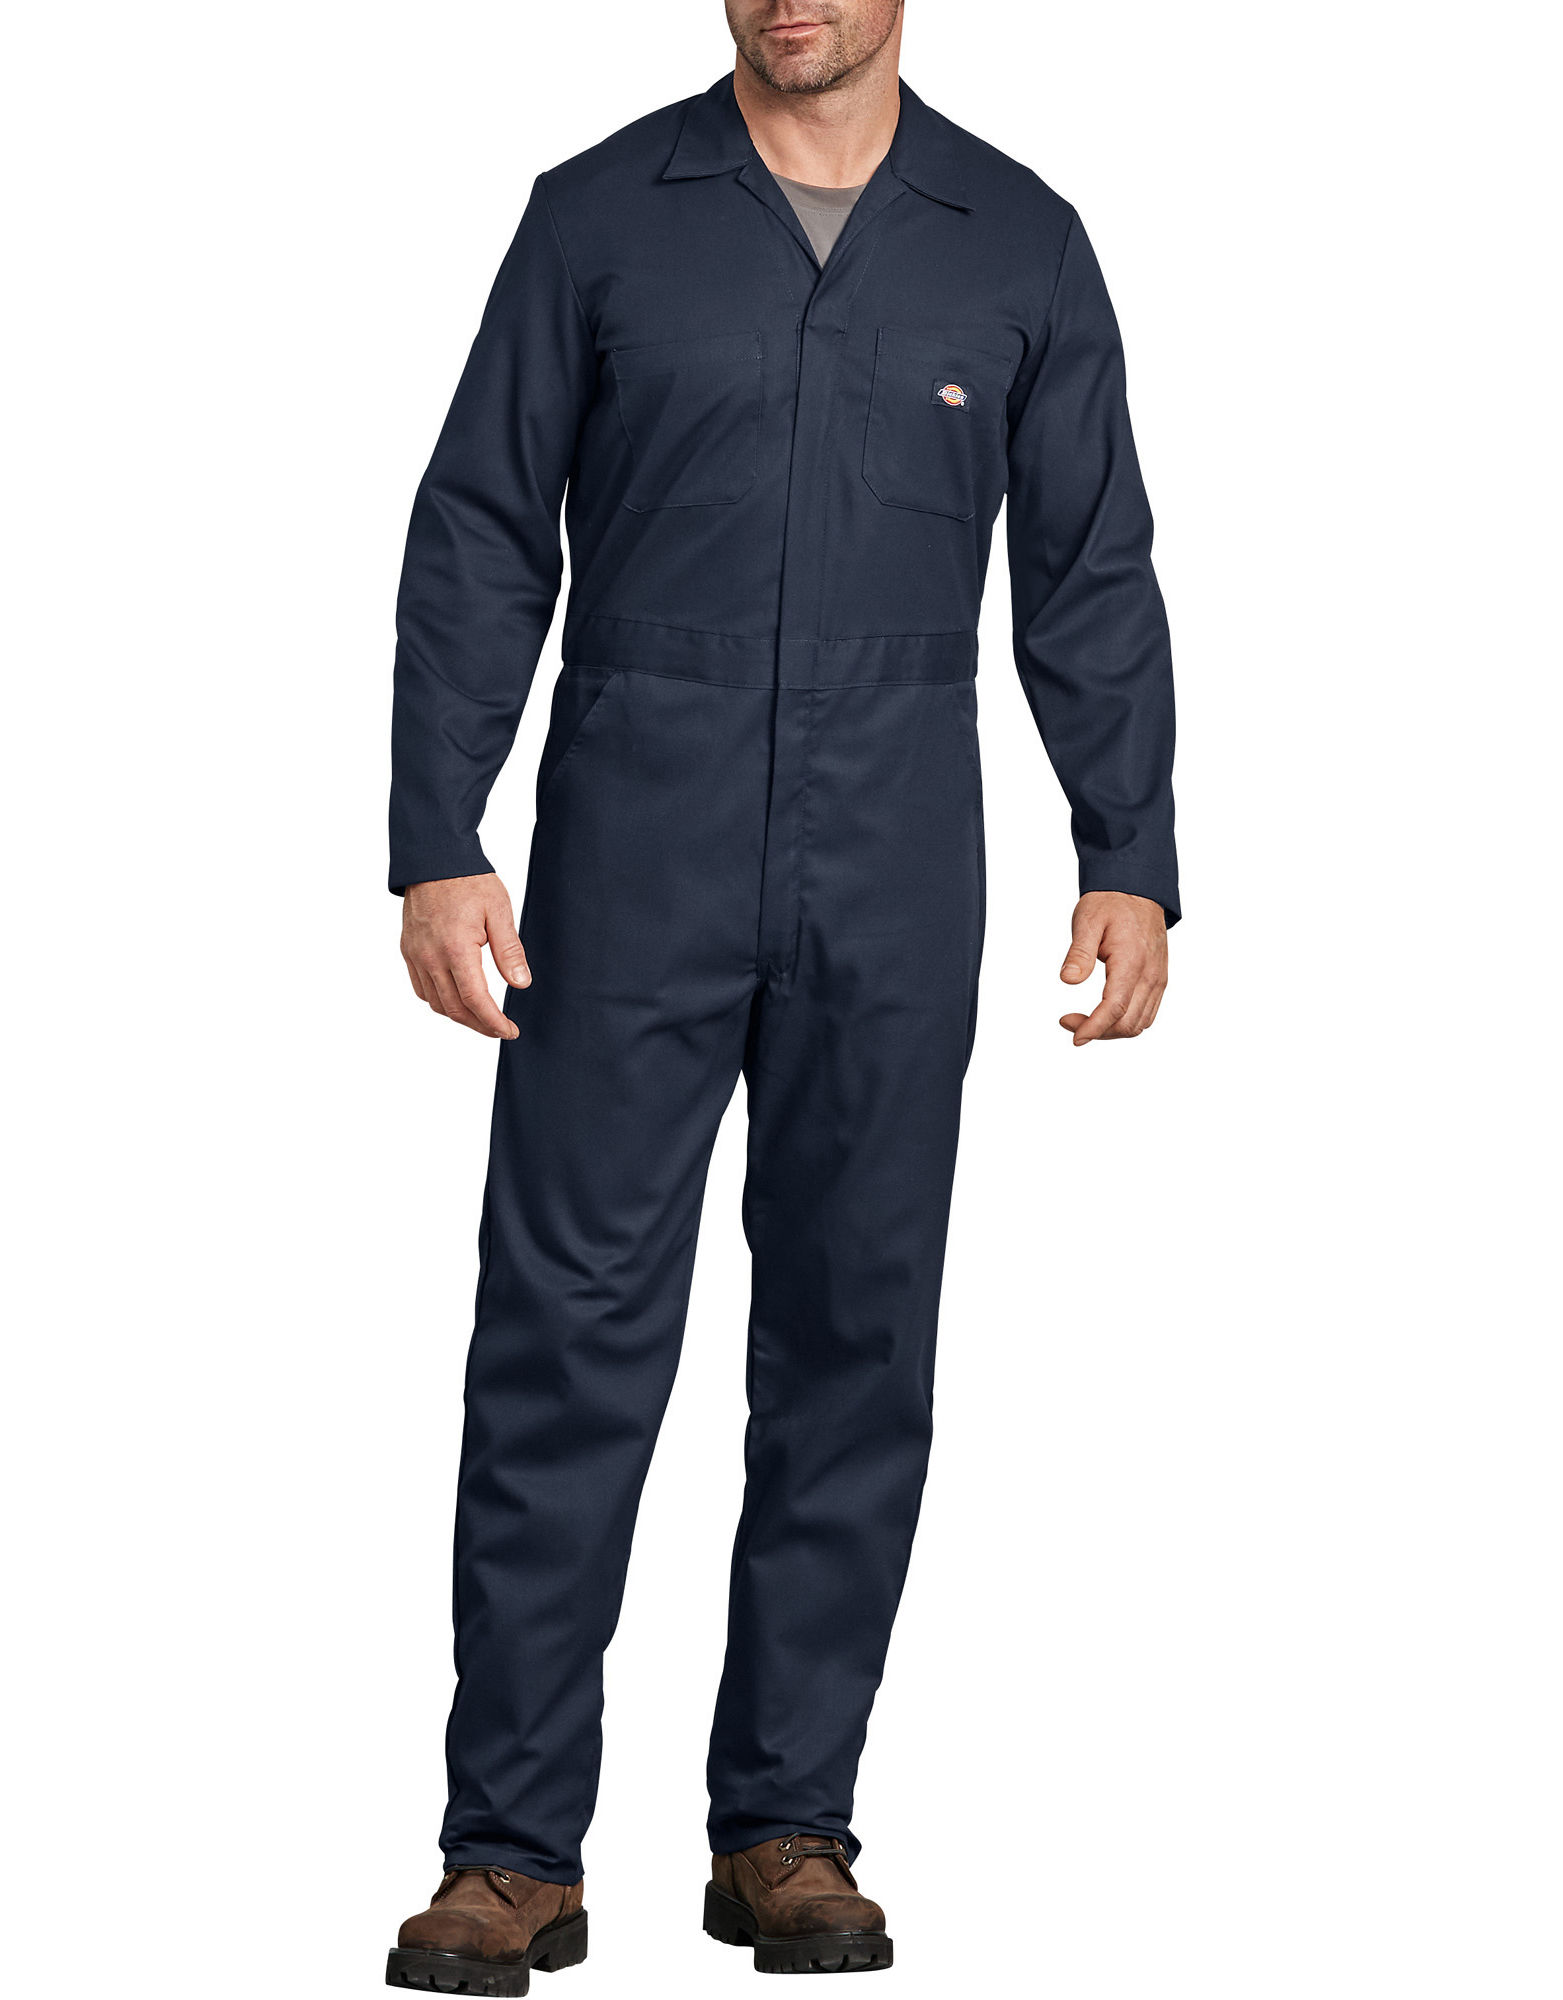 Action Back Jumpsuit with Multi Pockets Twill Stain & Wrinkle Resistant Work Coverall CQR Men's Short Sleeve Zip-Front Coverall 